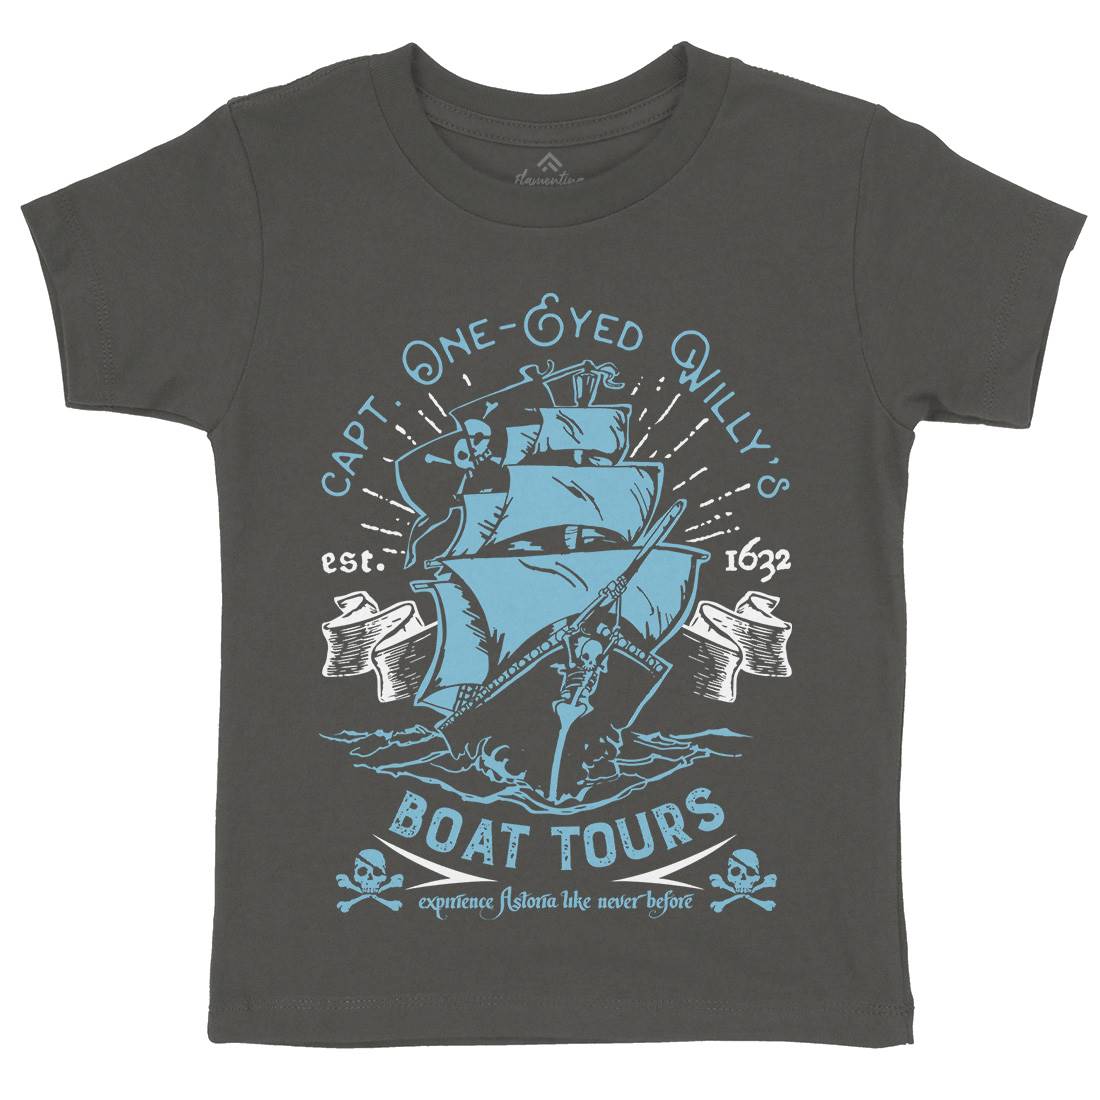 One-Eyed Willys Boat Tours Kids Organic Crew Neck T-Shirt Horror D160